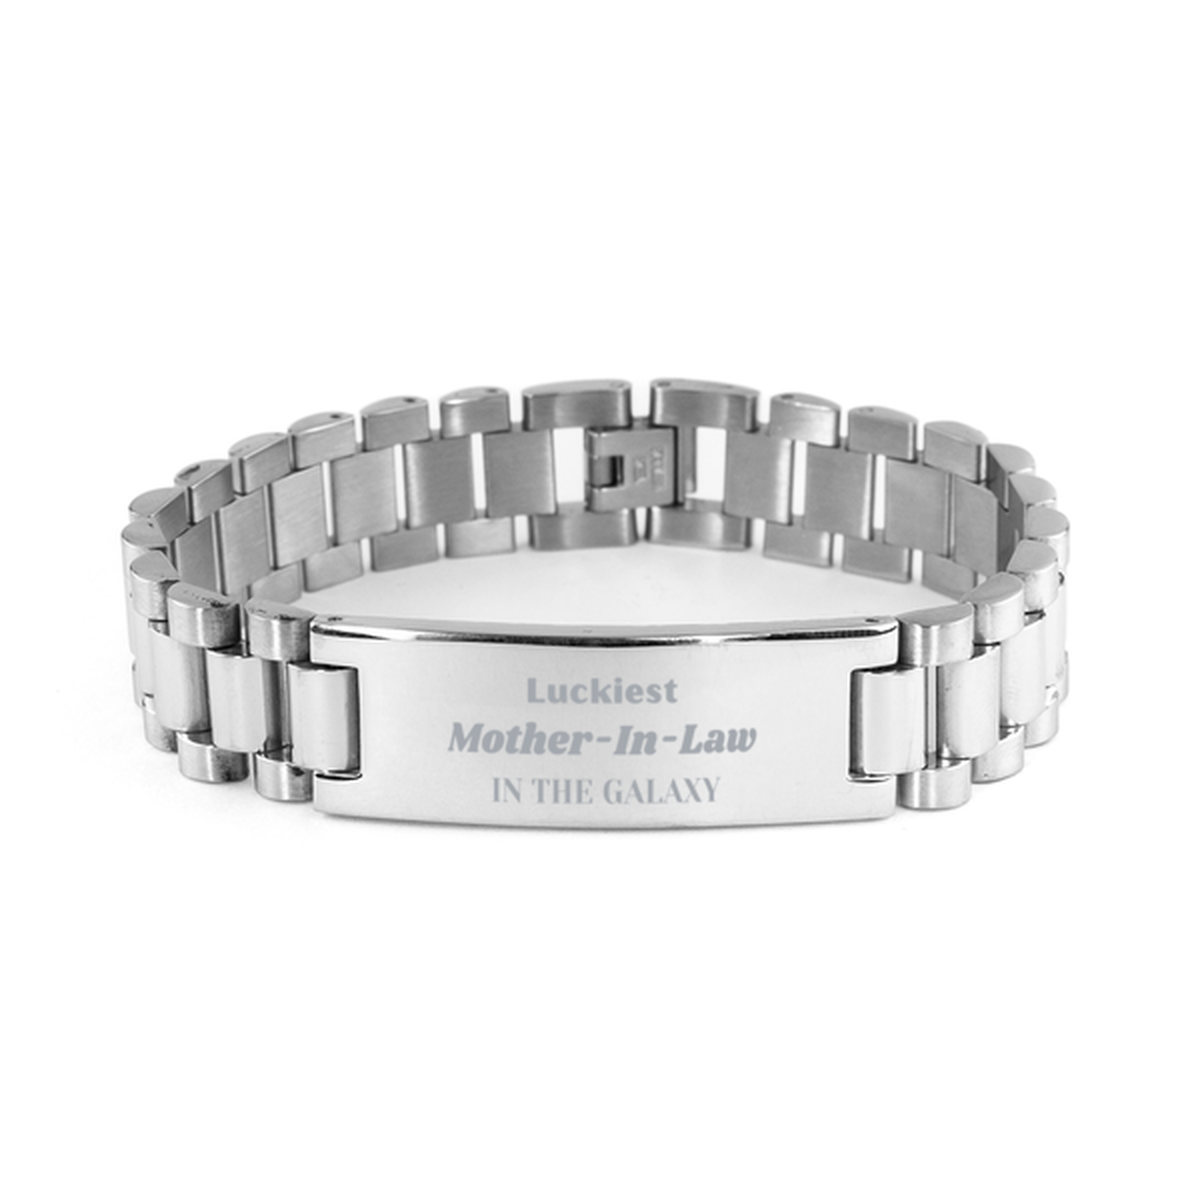 Luckiest Mother-In-Law in the Galaxy, To My Mother-In-Law Engraved Gifts, Christmas Mother-In-Law Ladder Stainless Steel Bracelet Gifts, X-mas Birthday Unique Gifts For Mother-In-Law Men Women